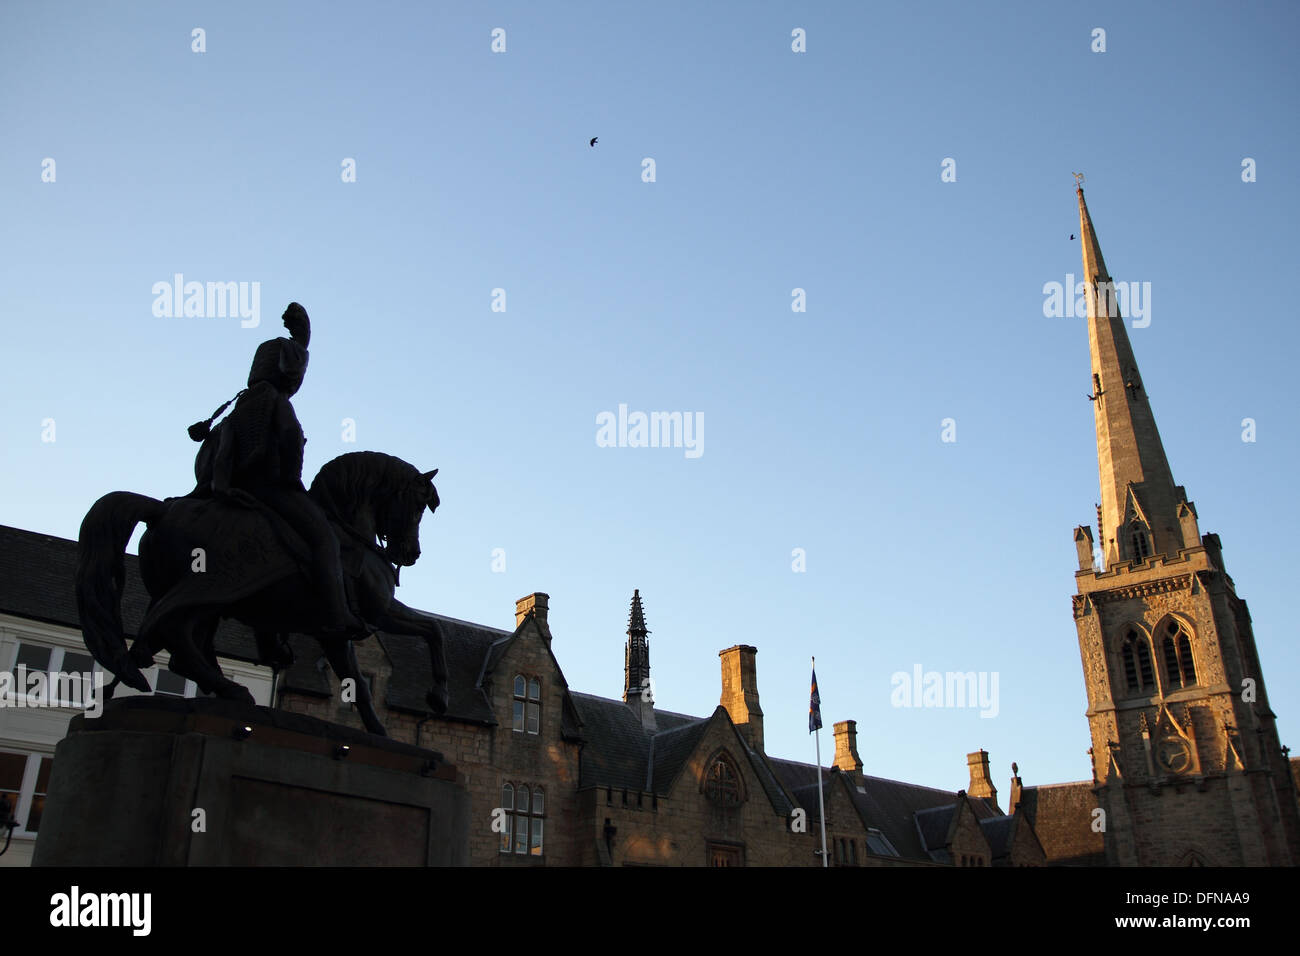 The statue of Lord Londonderry in Durham Market Place in the late evening Stock Photo